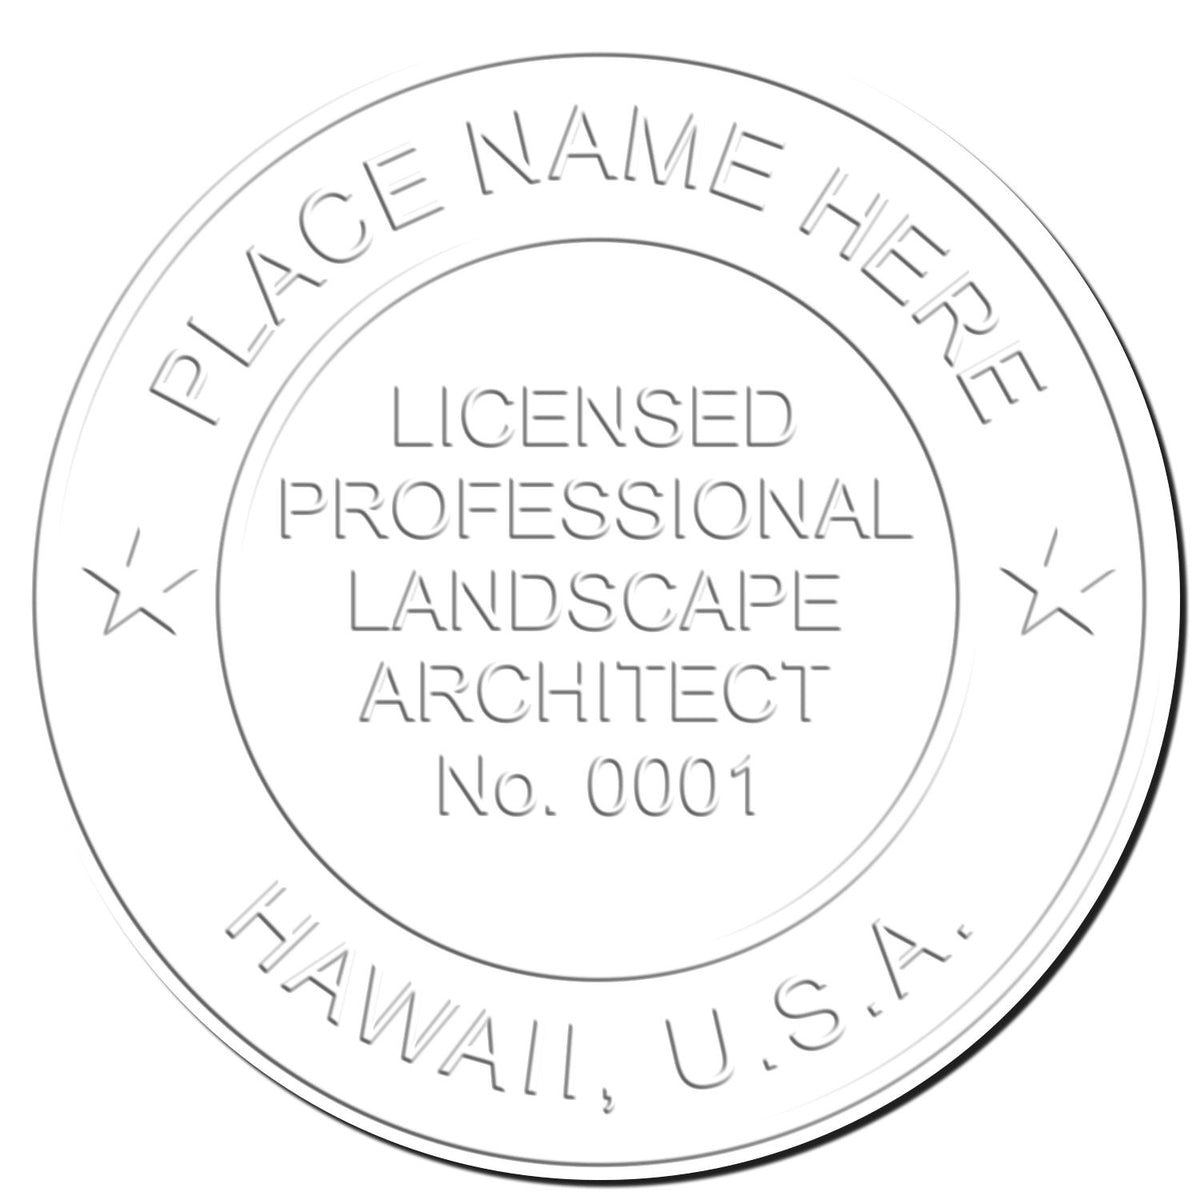 This paper is stamped with a sample imprint of the Soft Pocket Hawaii Landscape Architect Embosser, signifying its quality and reliability.